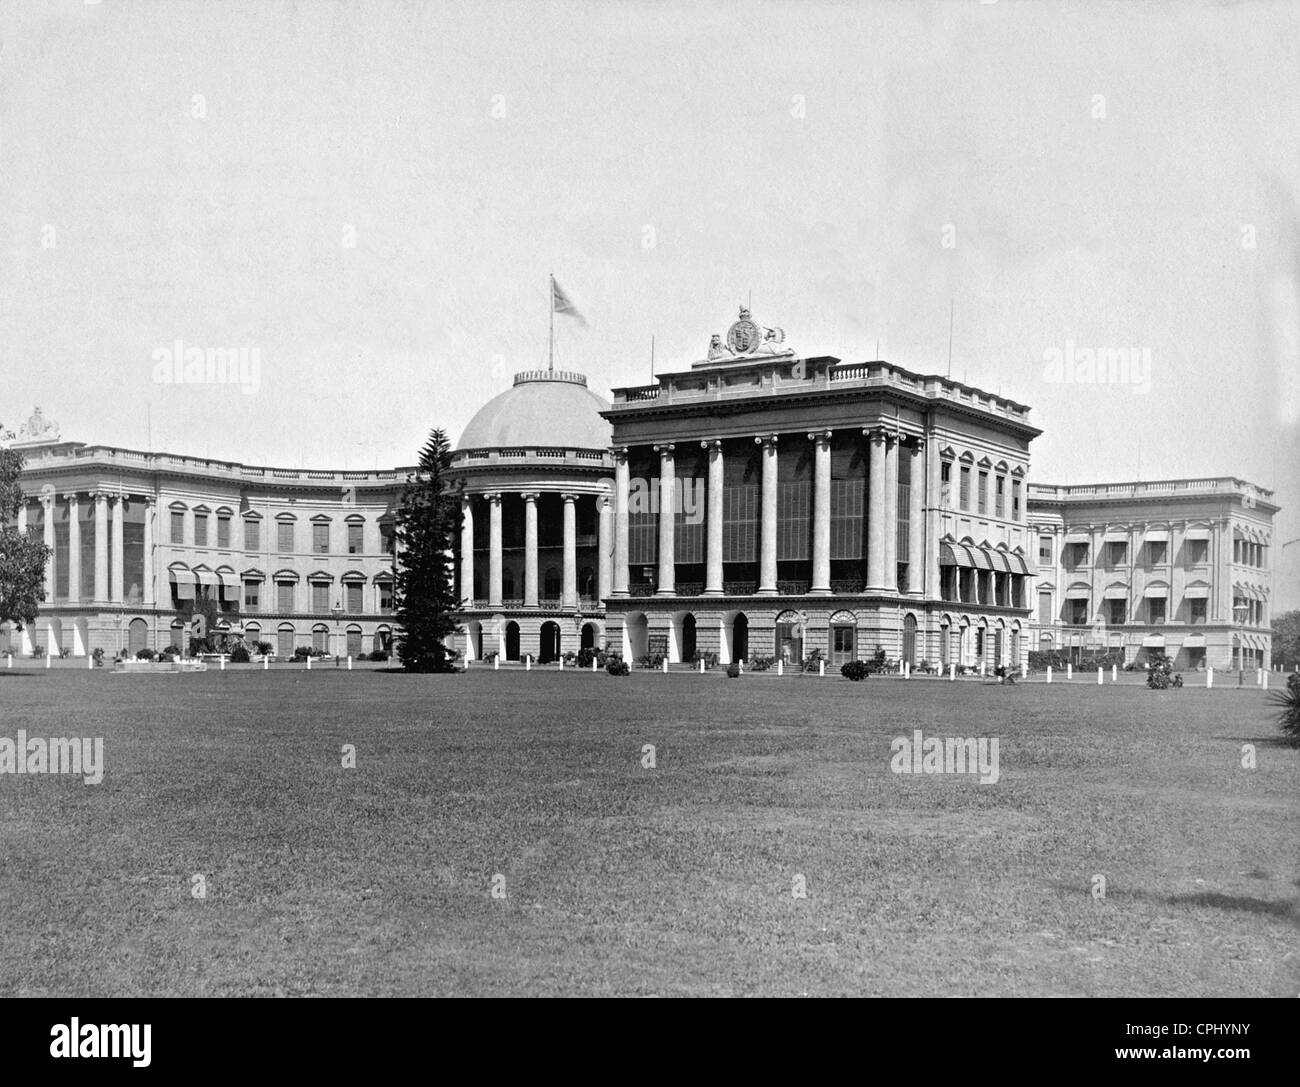 The viceregal palace Black and White Stock Photos & Images - Alamy